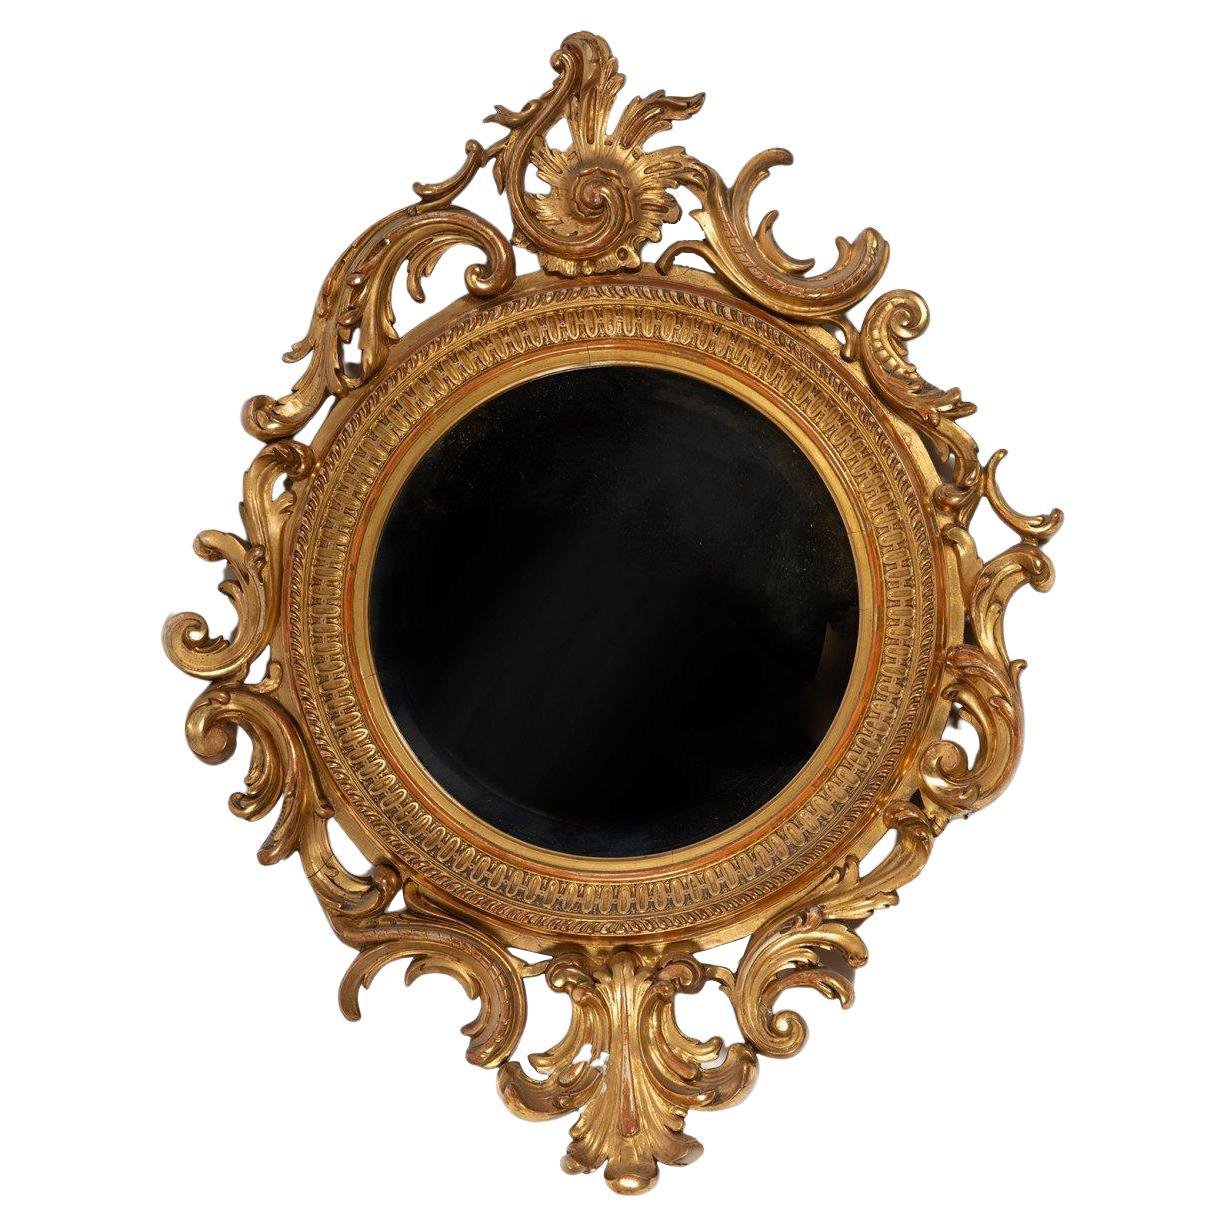 Image of 19th century French Empire Style Circular Mirror set in an elegant Giltwood and Stucco Frame